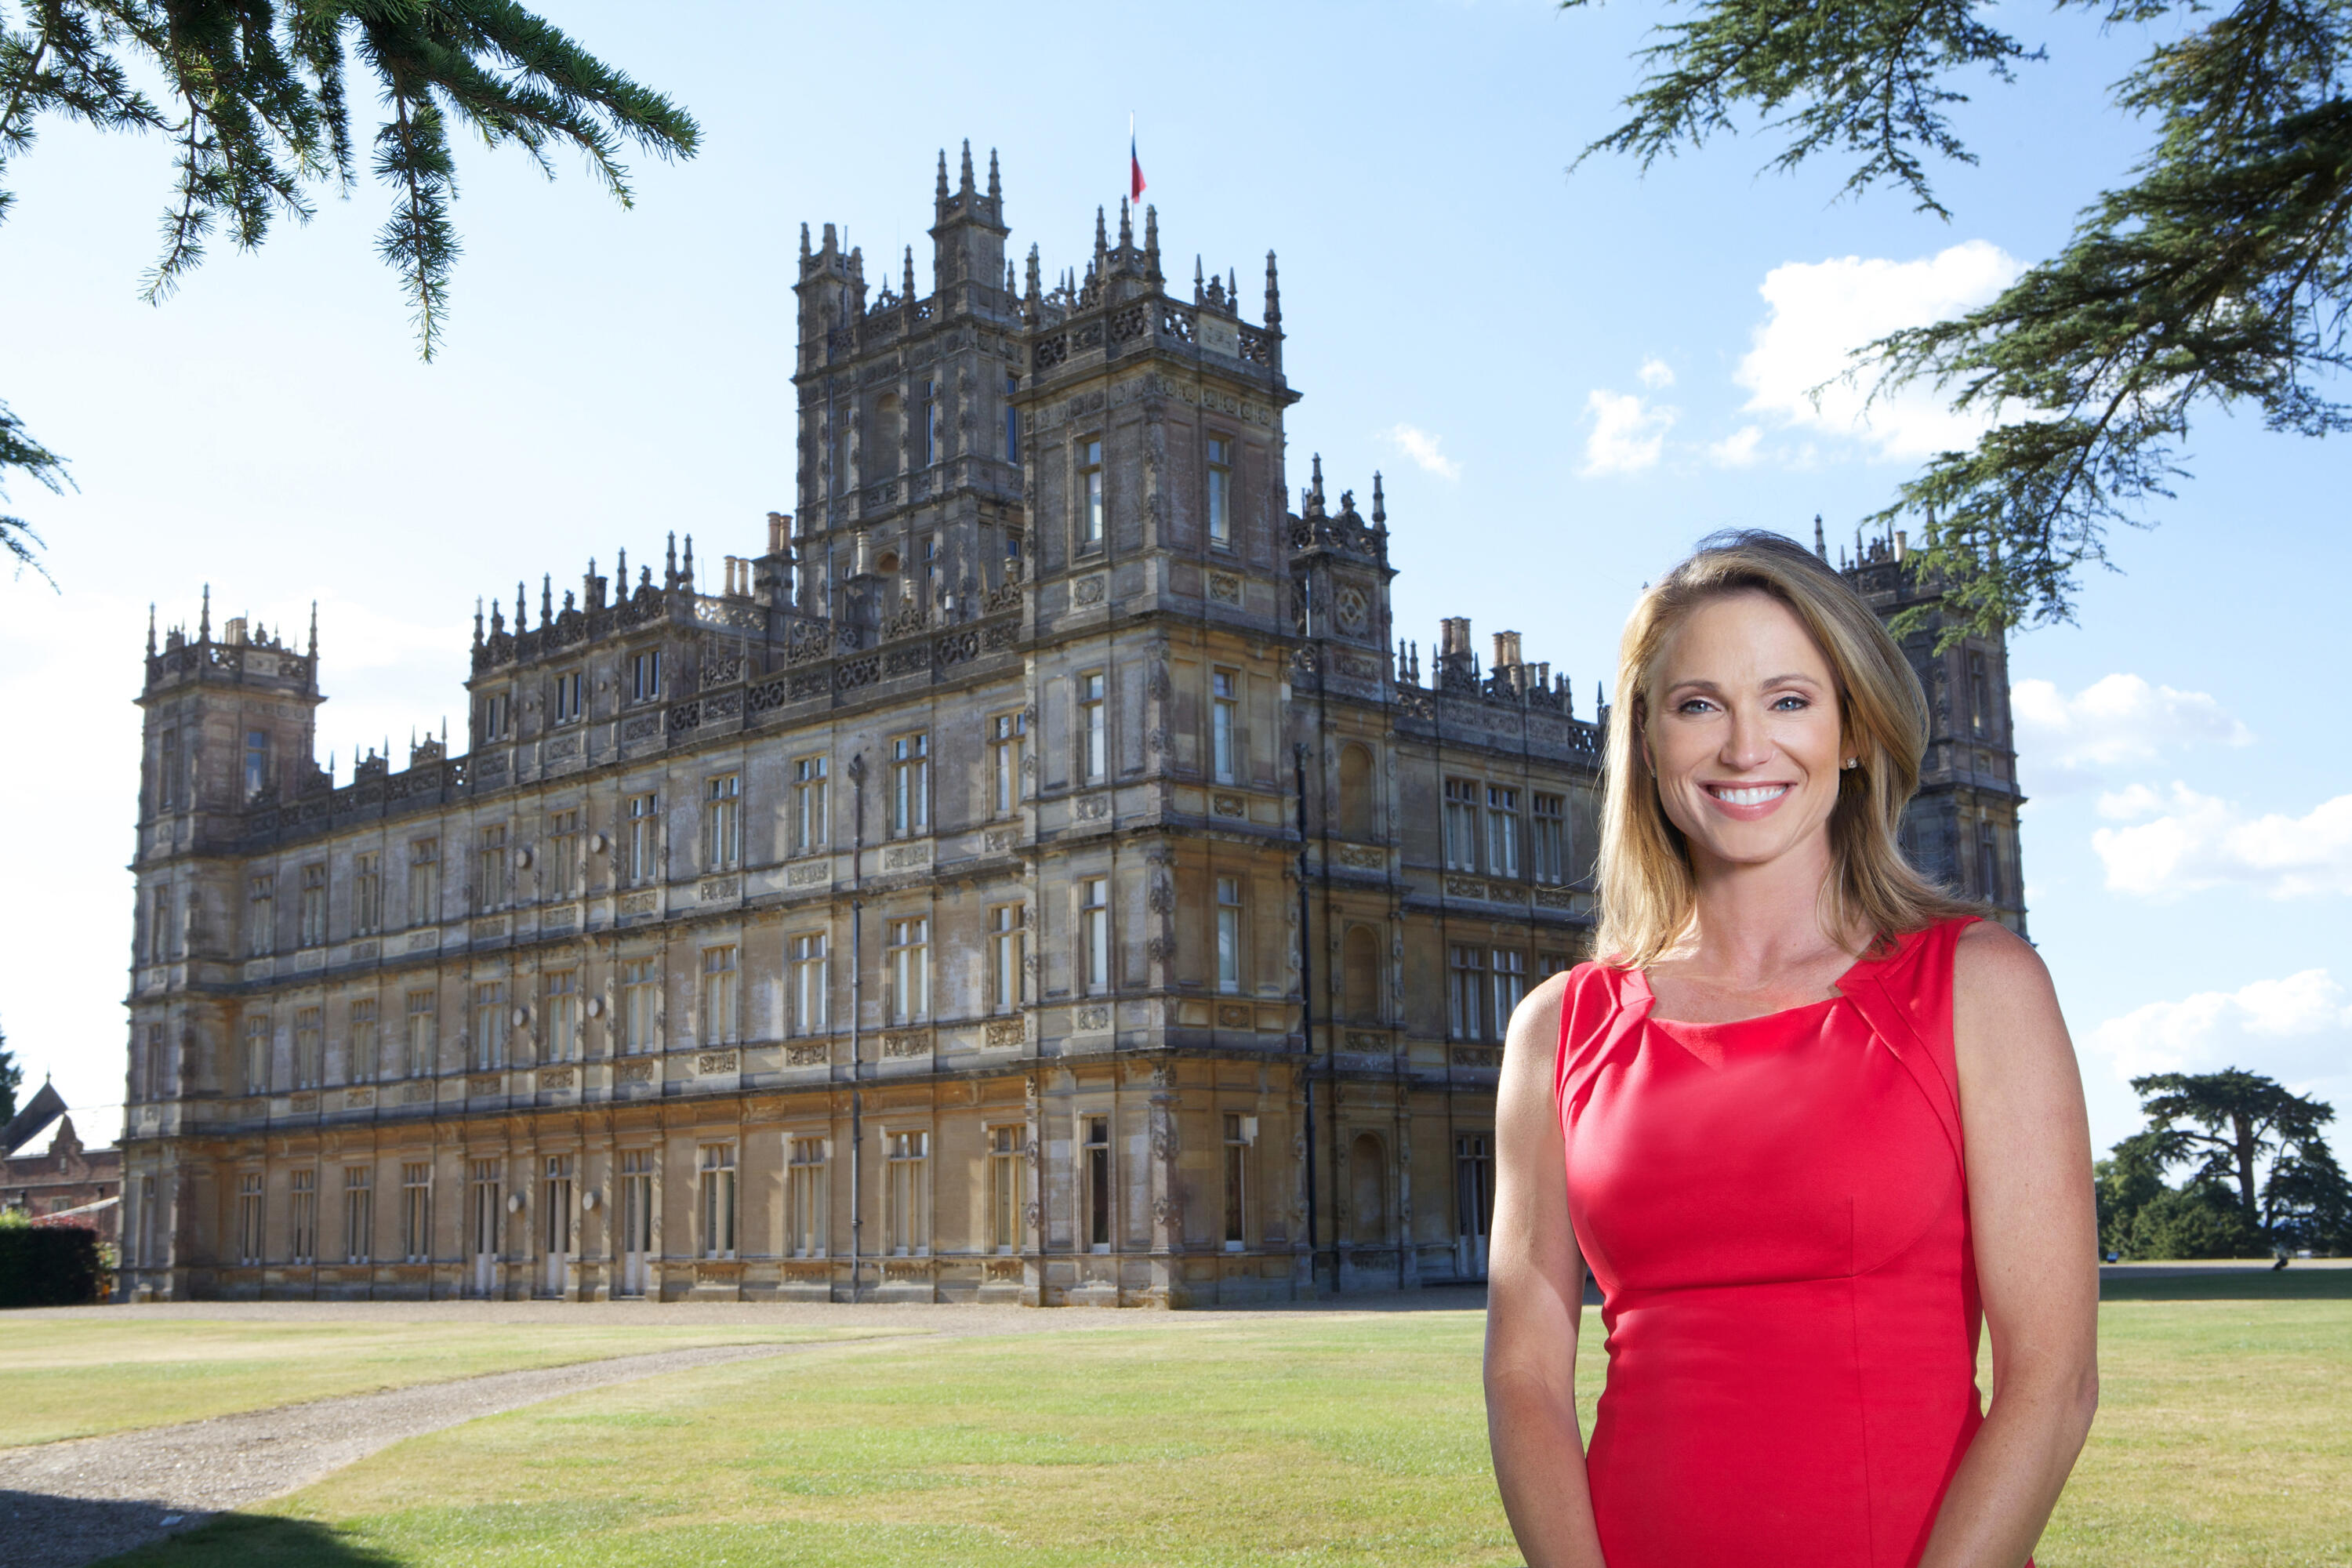 The Downton Abbey Castle Is Now Available To Rent On Airbnb | iHeart